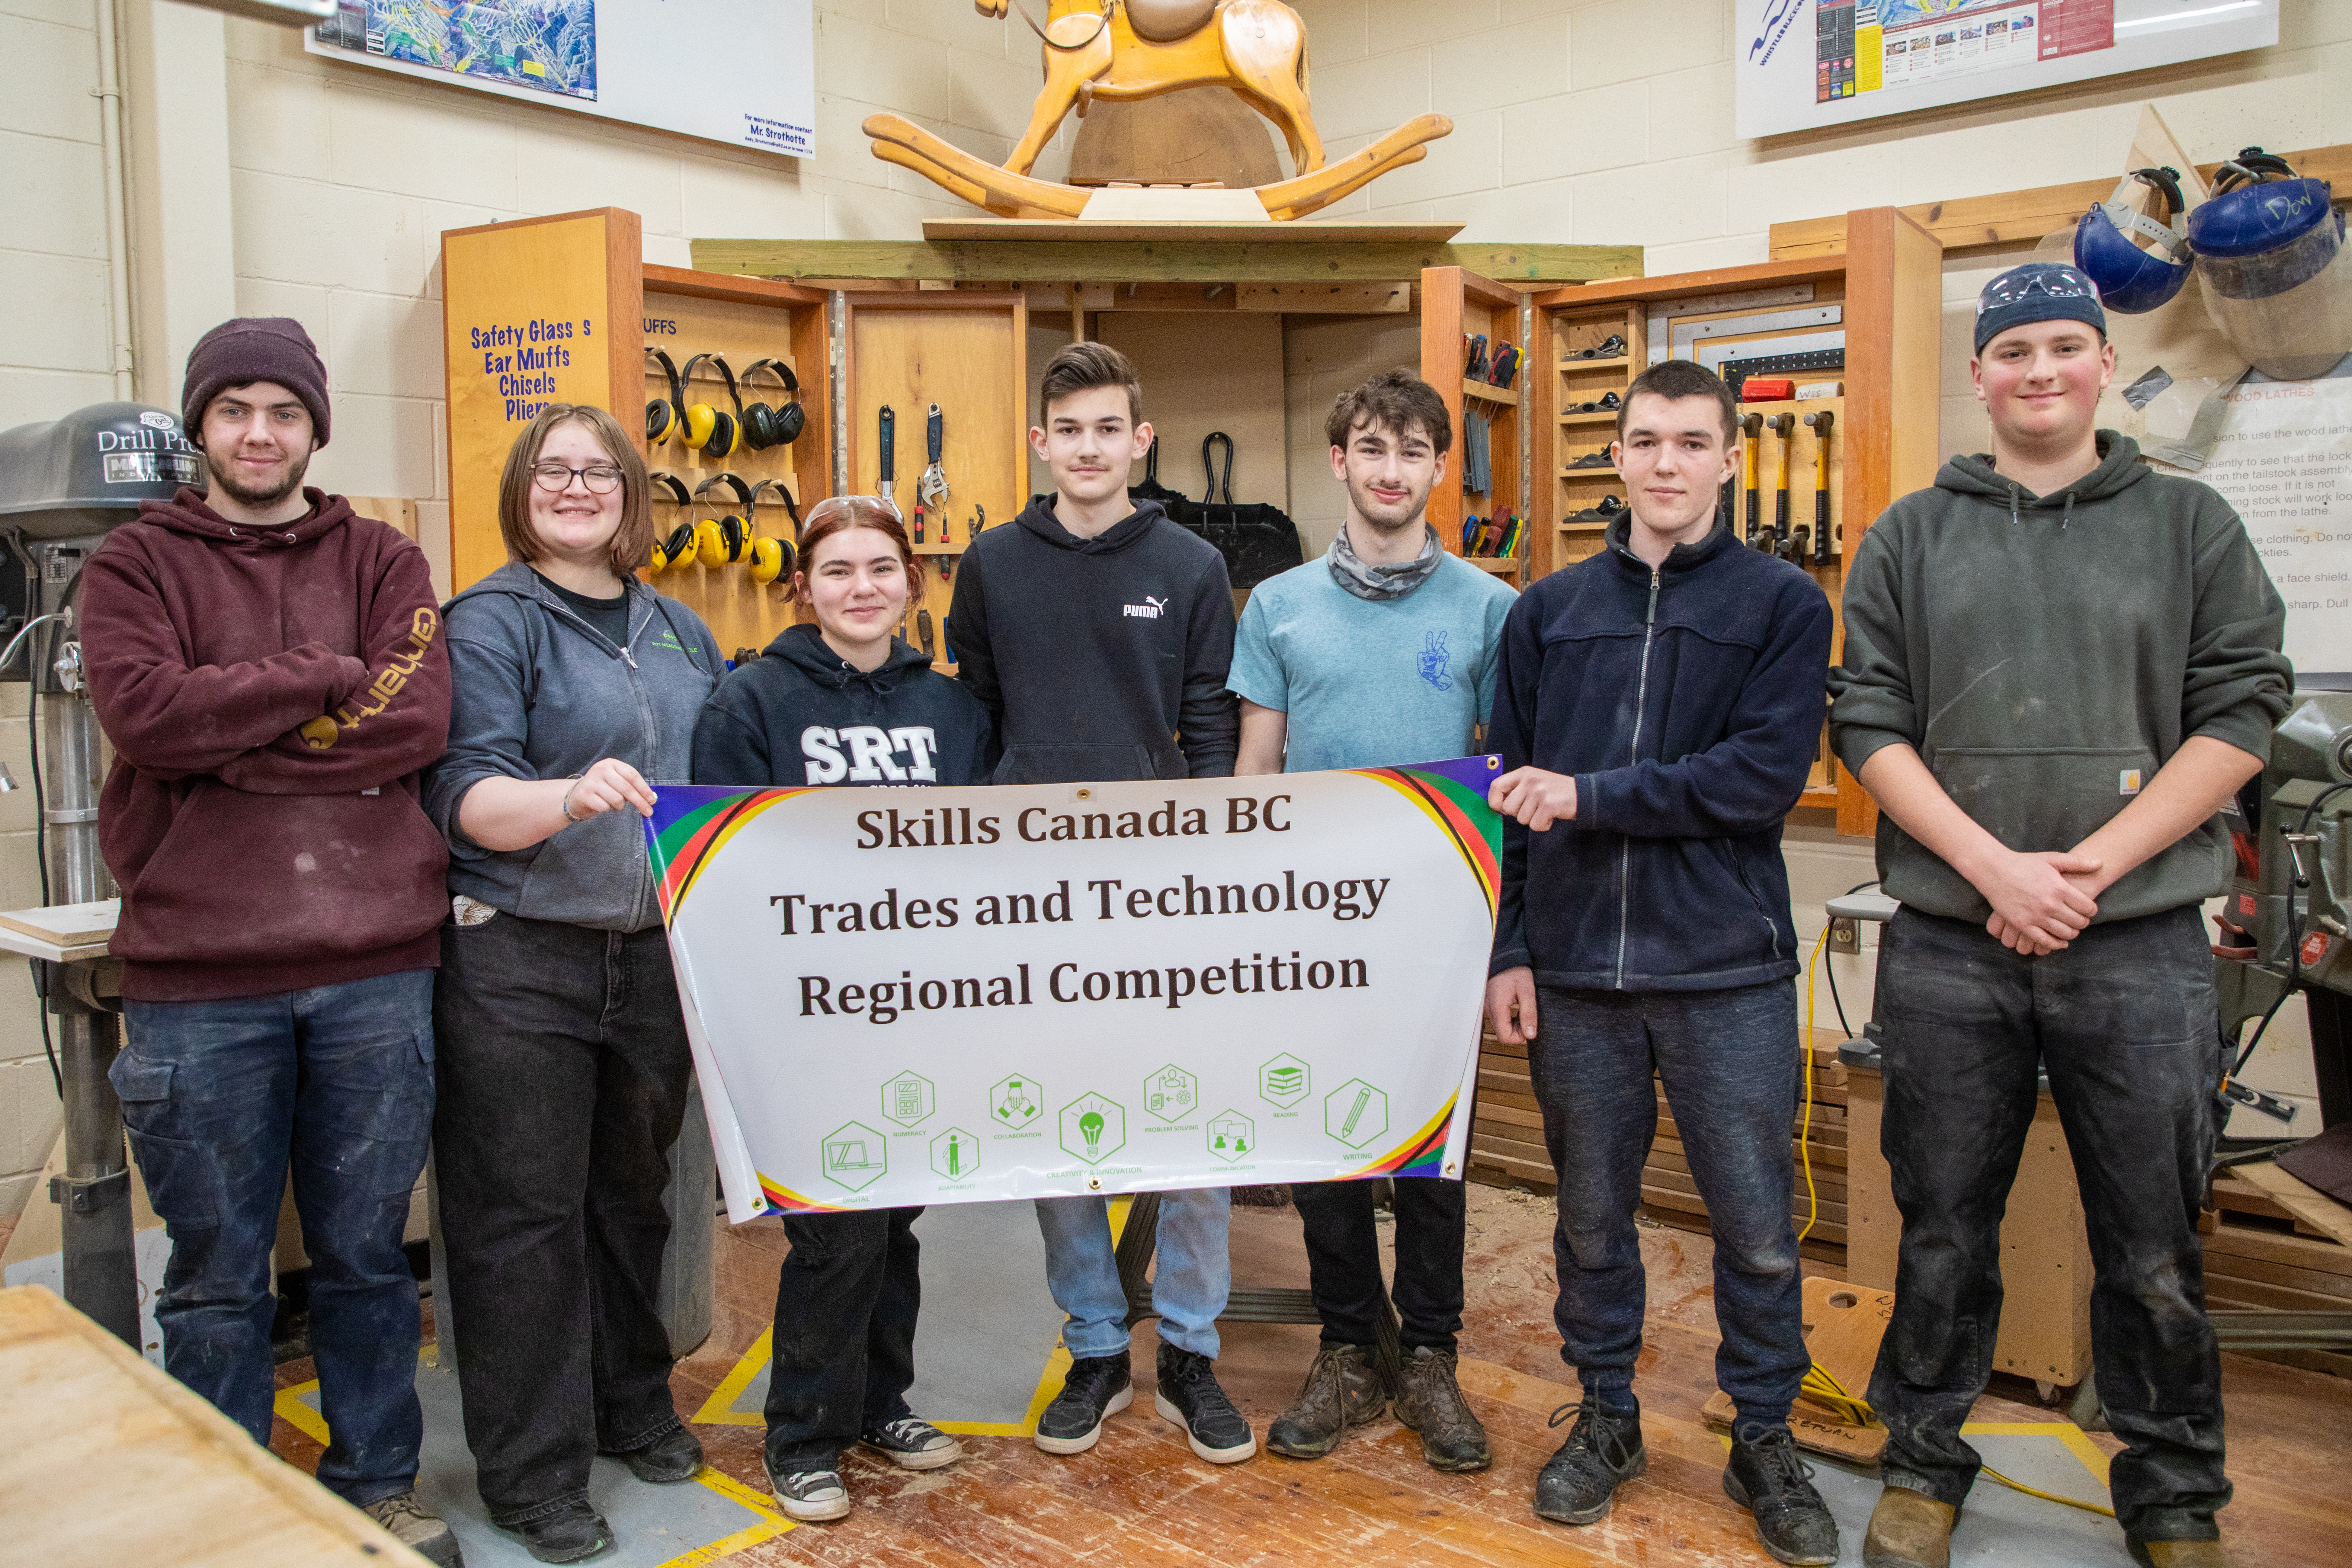 Students who participated in the Skills Canada BC cabinetmaking regional competition hold up a sign with the competition name.